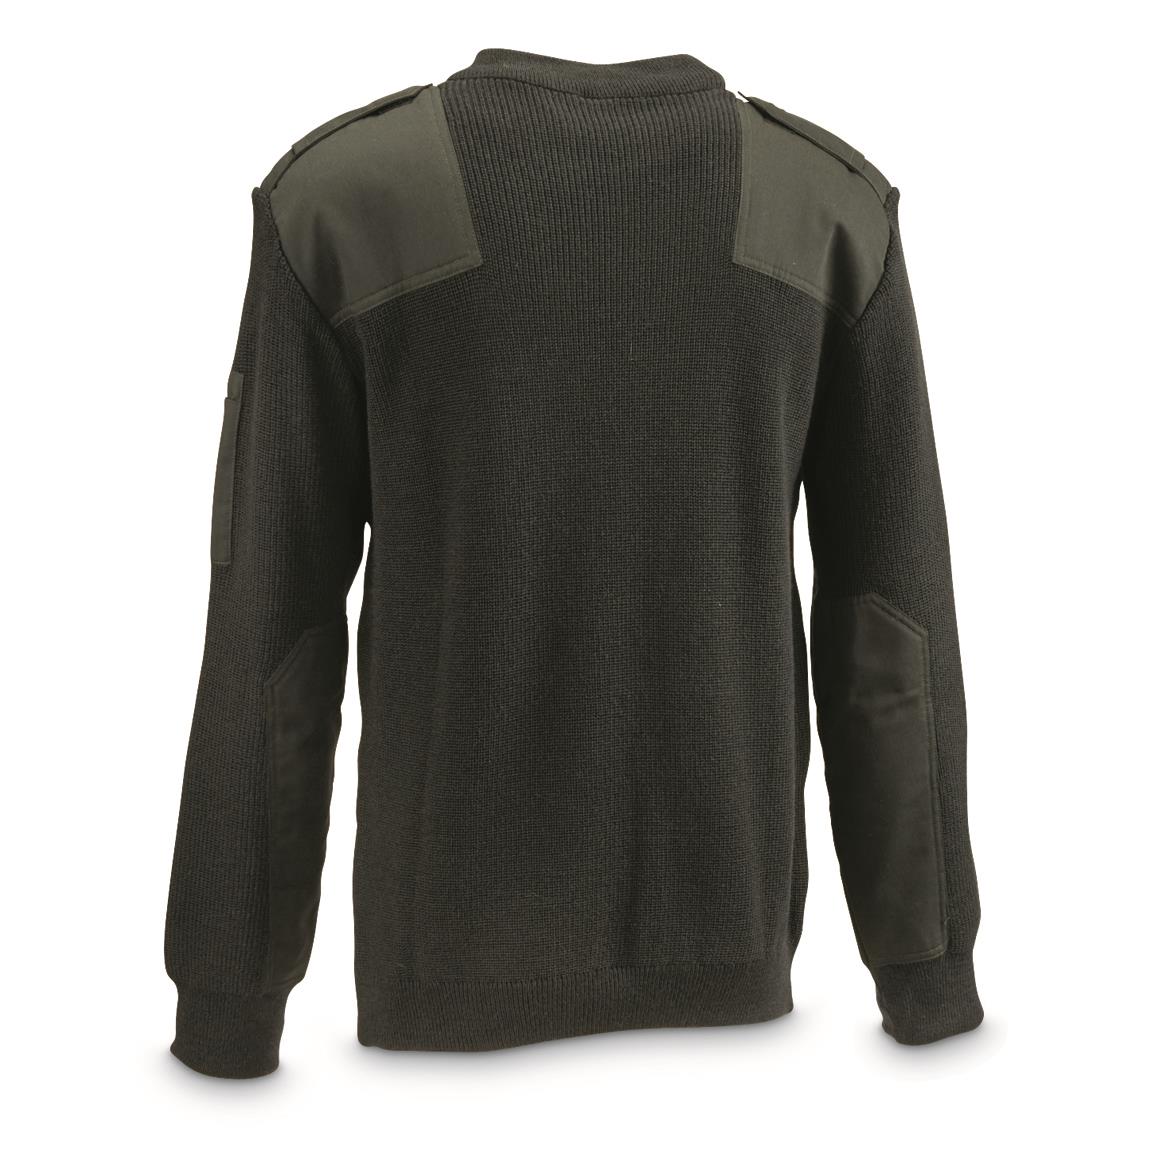 Dutch Military Surplus Commando Sweater, New - 679564, Sweaters at ...